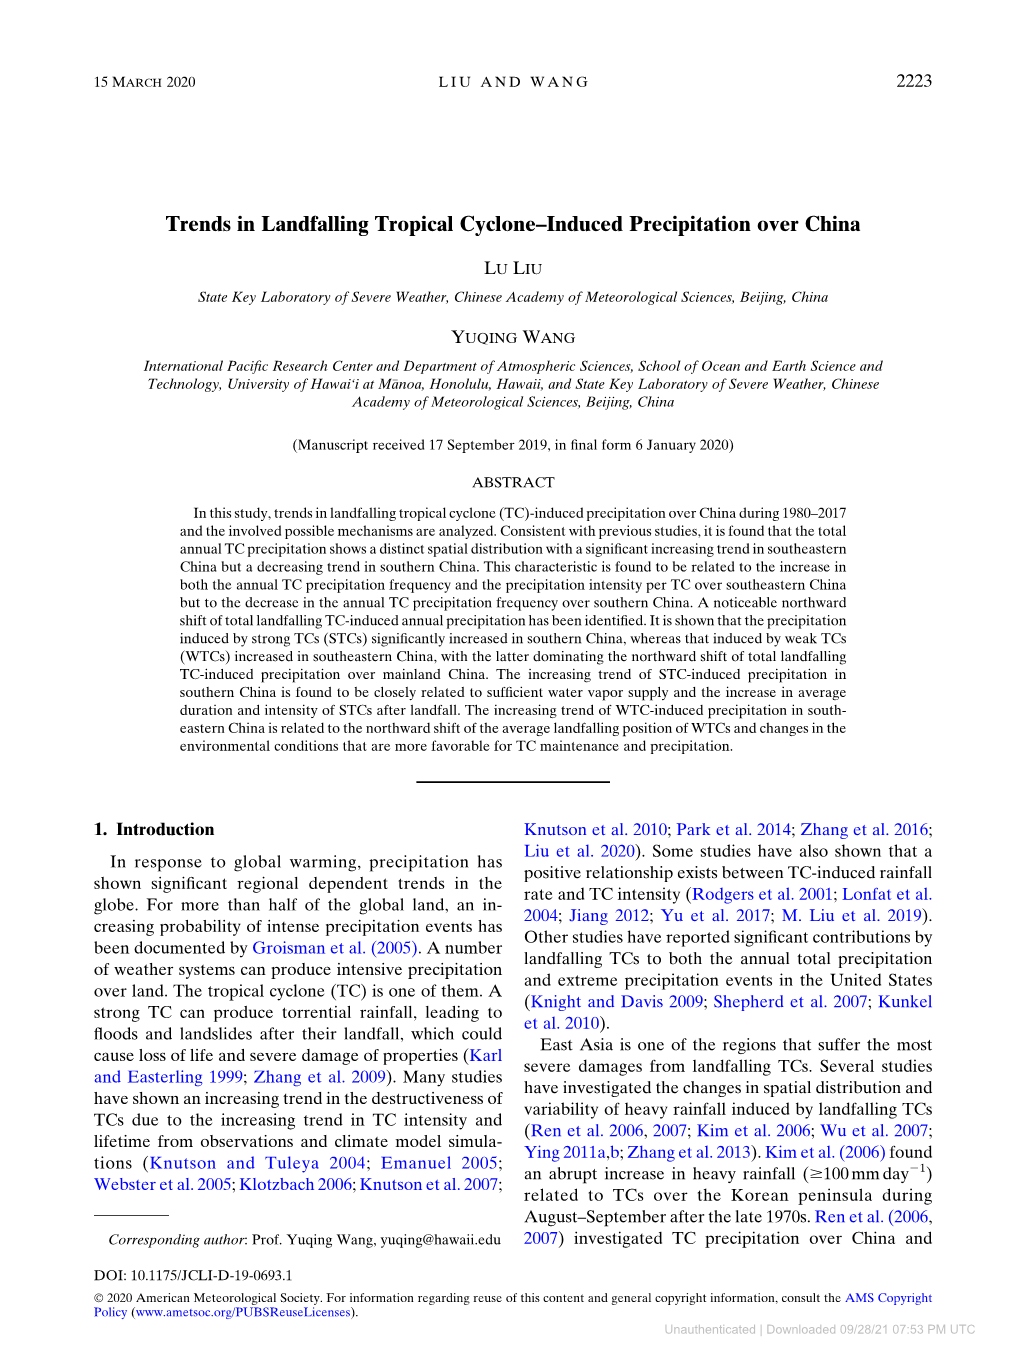 Trends in Landfalling Tropical Cyclone–Induced Precipitation Over China